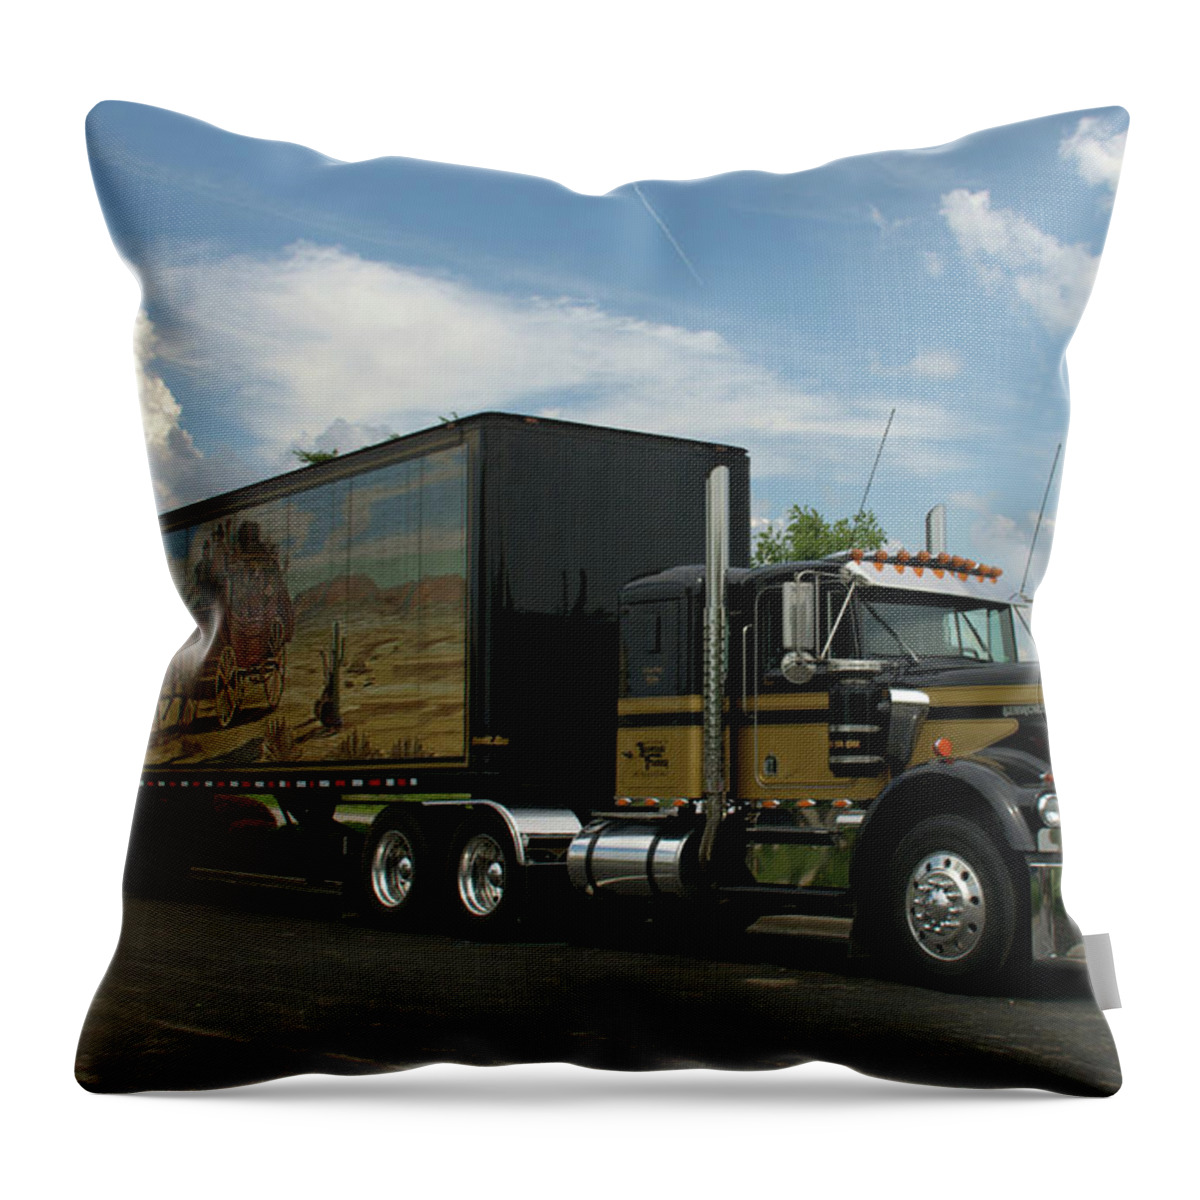 Smokey Throw Pillow featuring the photograph Snowmans Dream Replica Semi Trruck by Tim McCullough